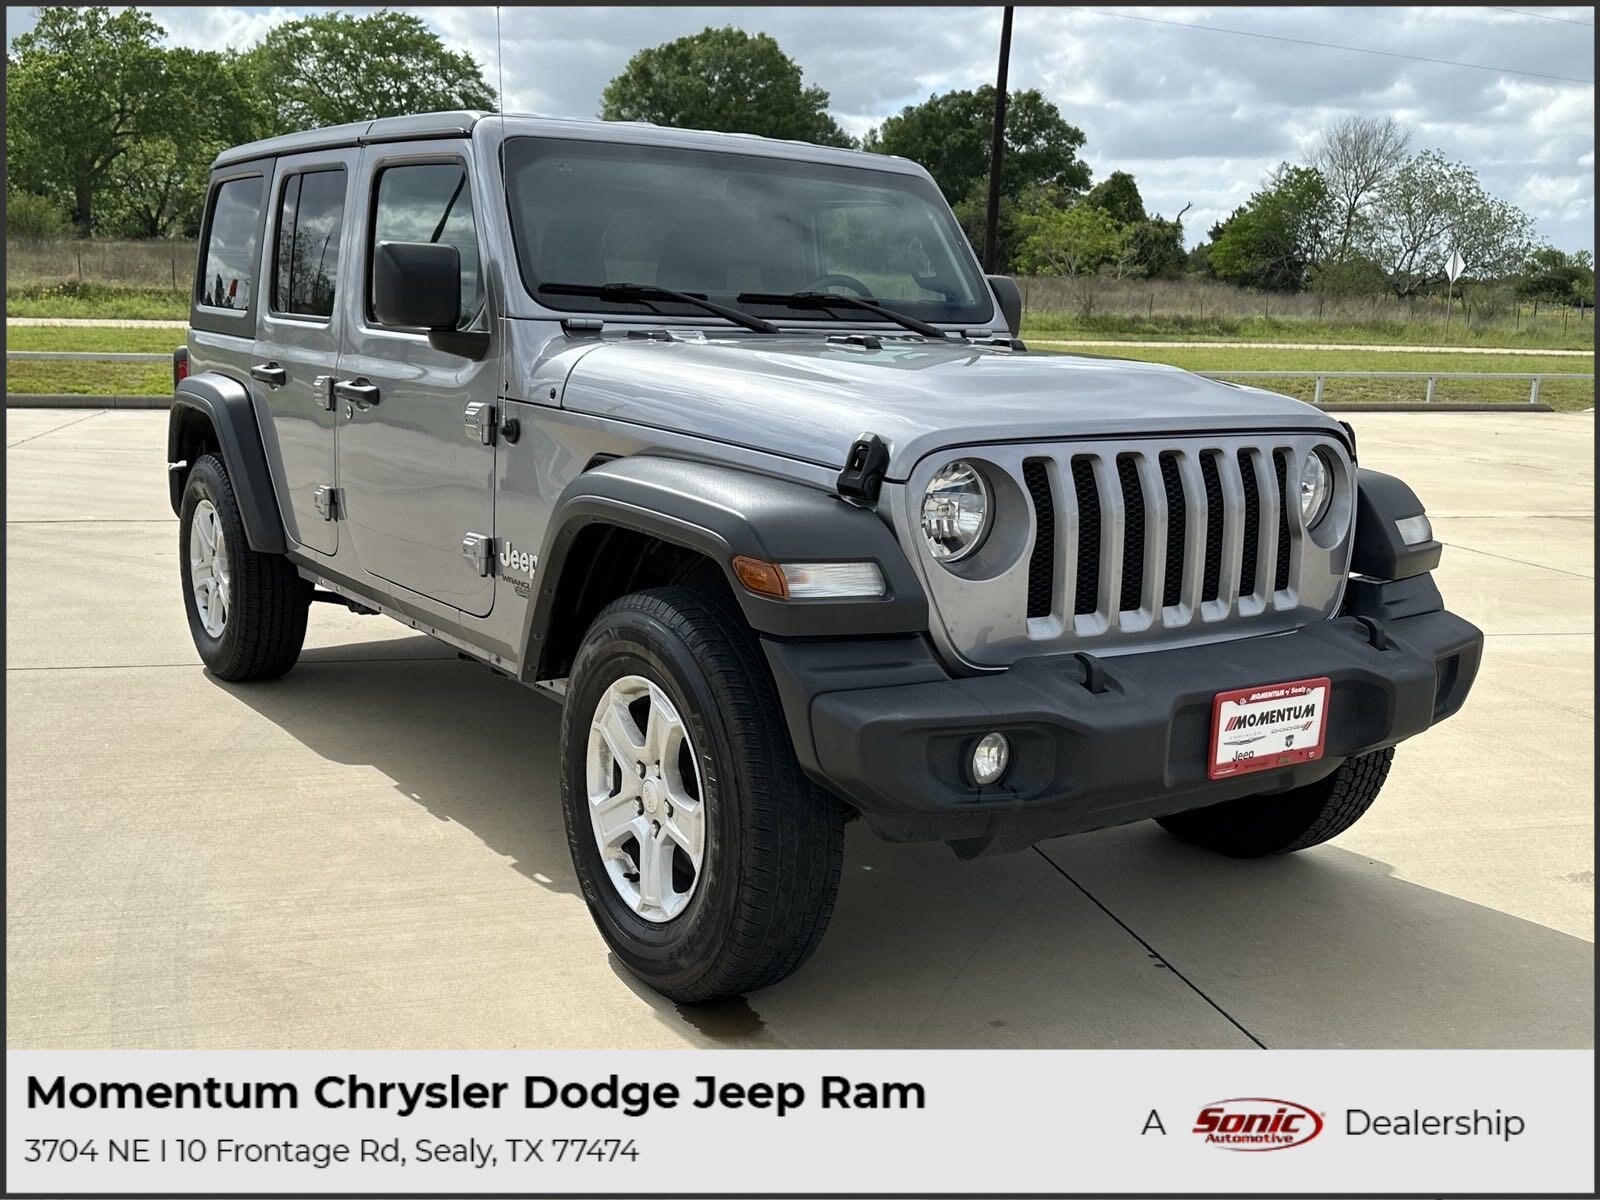 Used 2021 Jeep Wrangler For Sale in Houston near Sugar Land, TX | PMW551818